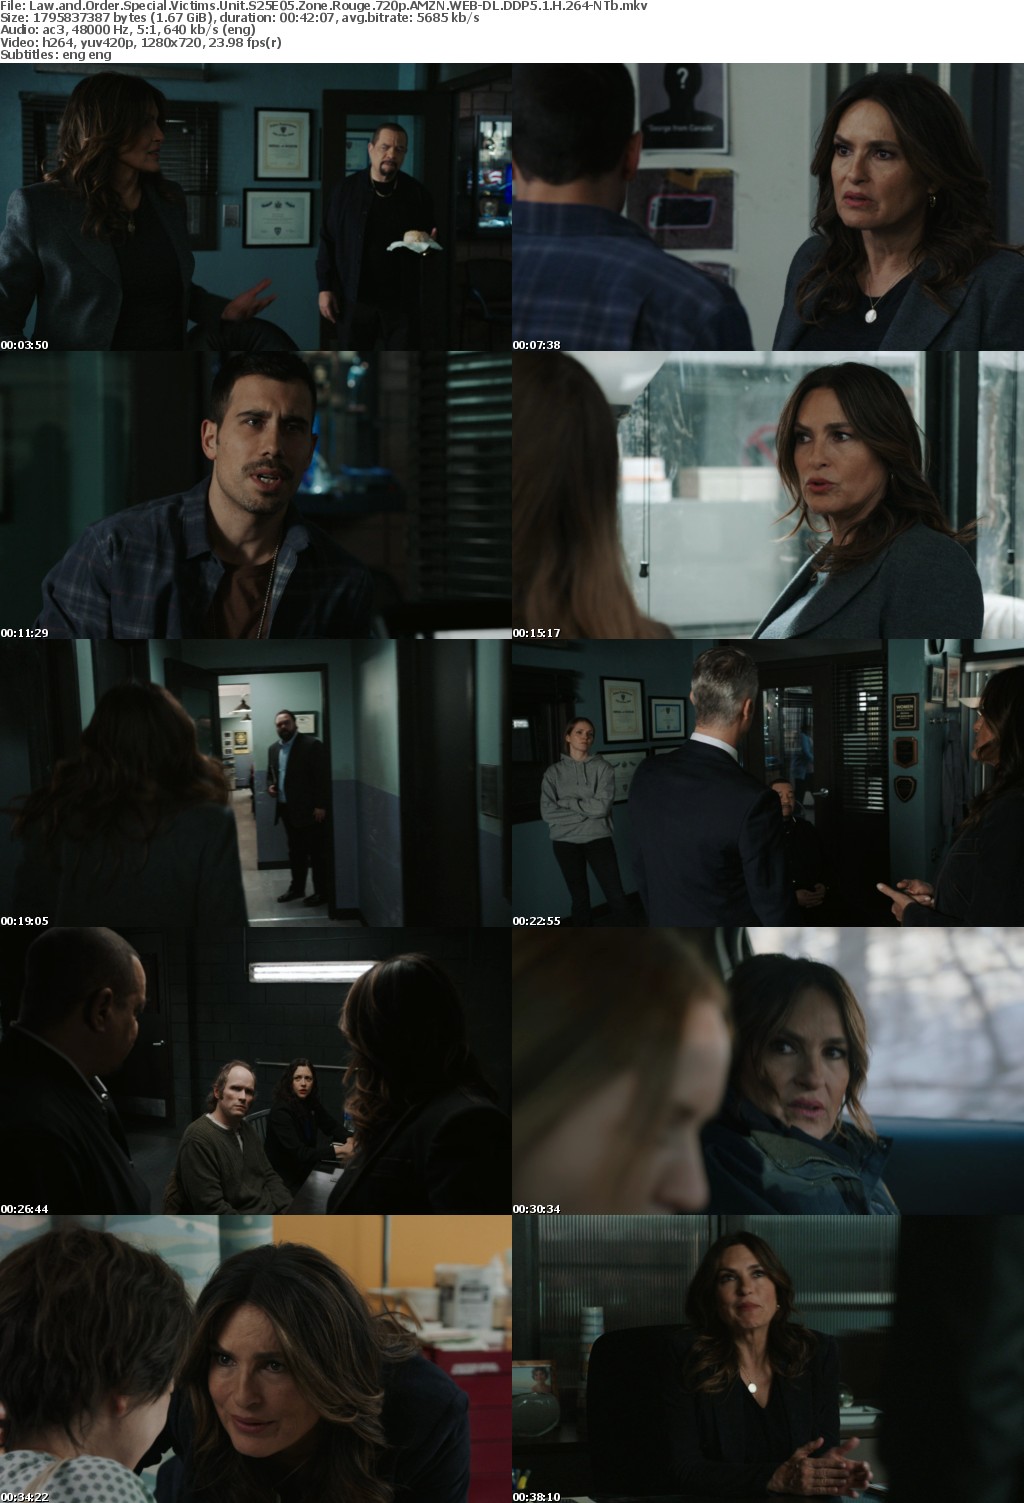 Law and Order Special Victims Unit S25E05 Zone Rouge 720p AMZN WEB-DL DDP5 1 H 264-NTb